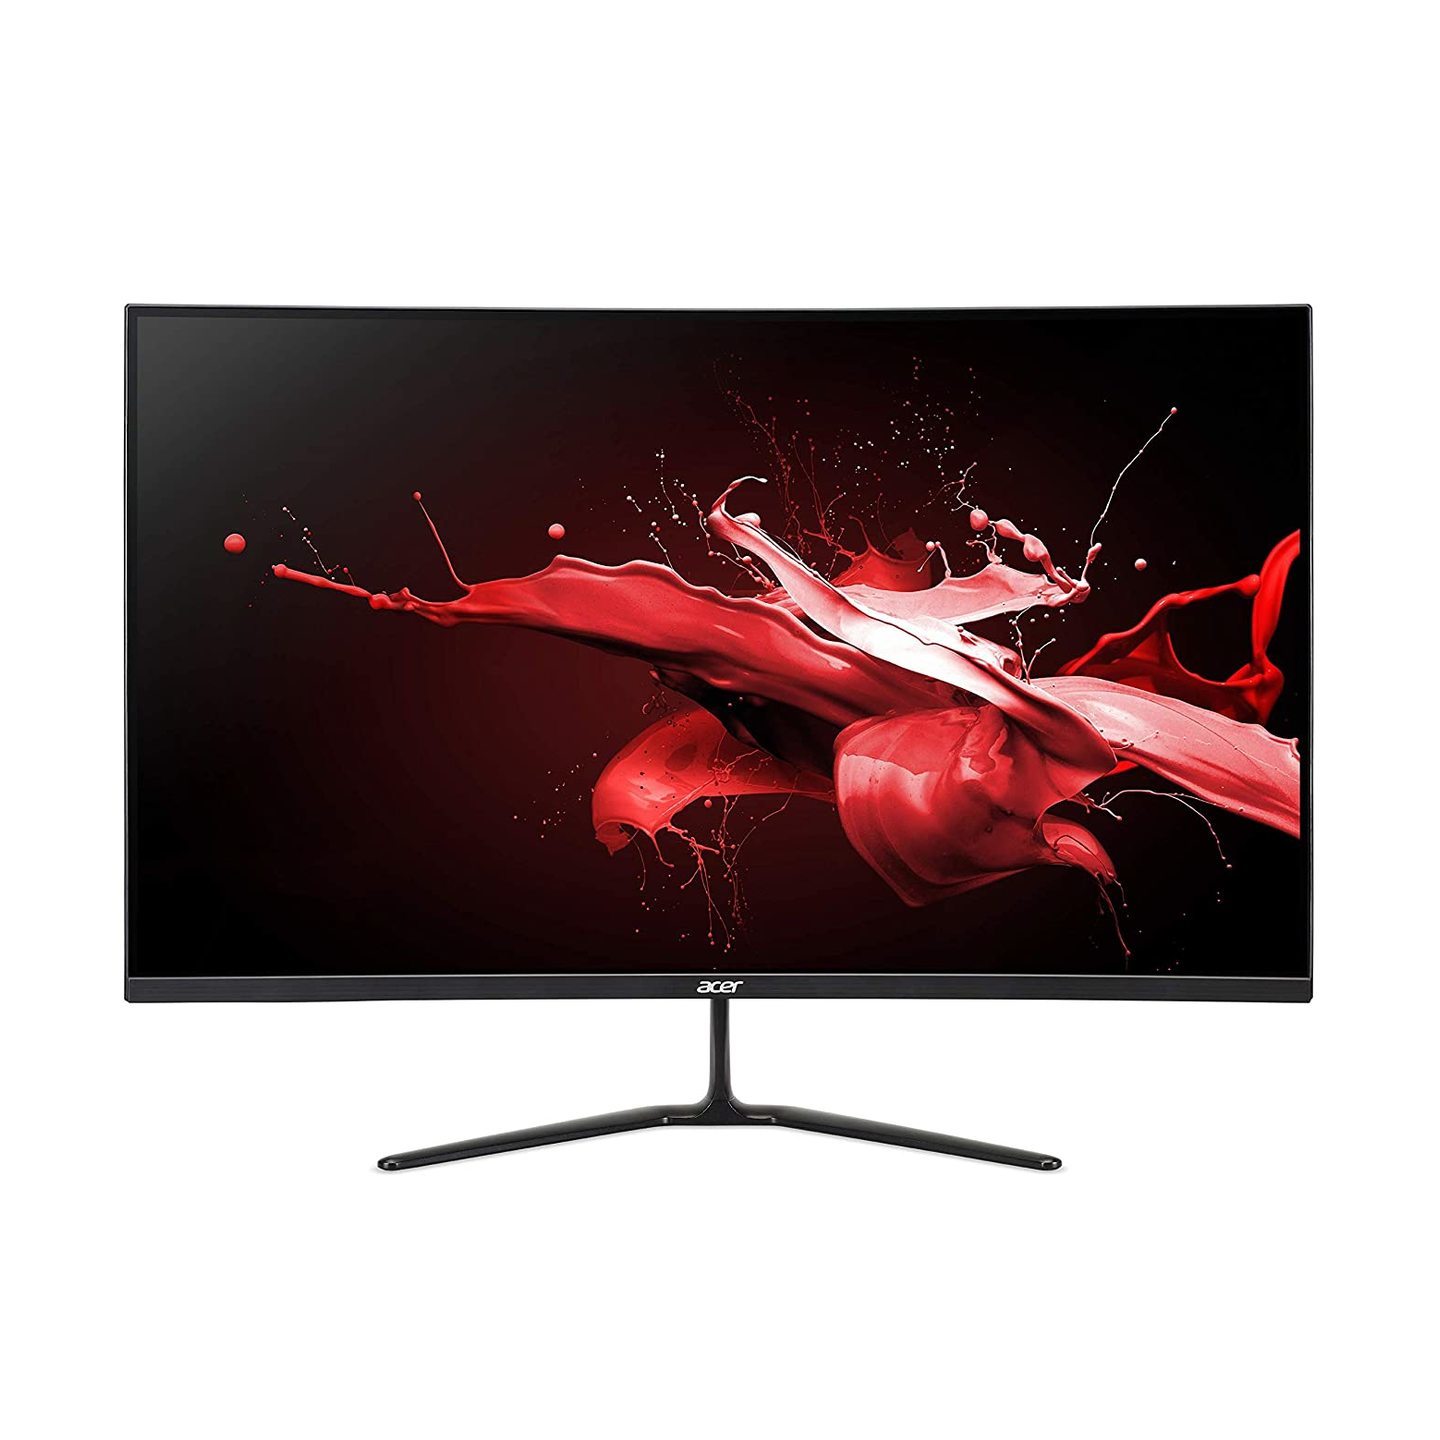 Acer ED320QR Full HD VA Panel LED Curved Gaming Monitor with 165Hz refresh rate AMD FreeSync and 2 X HDMI 1 X DisplayPort (Black, 31.5 inches, 1920 x 1080 pixels)